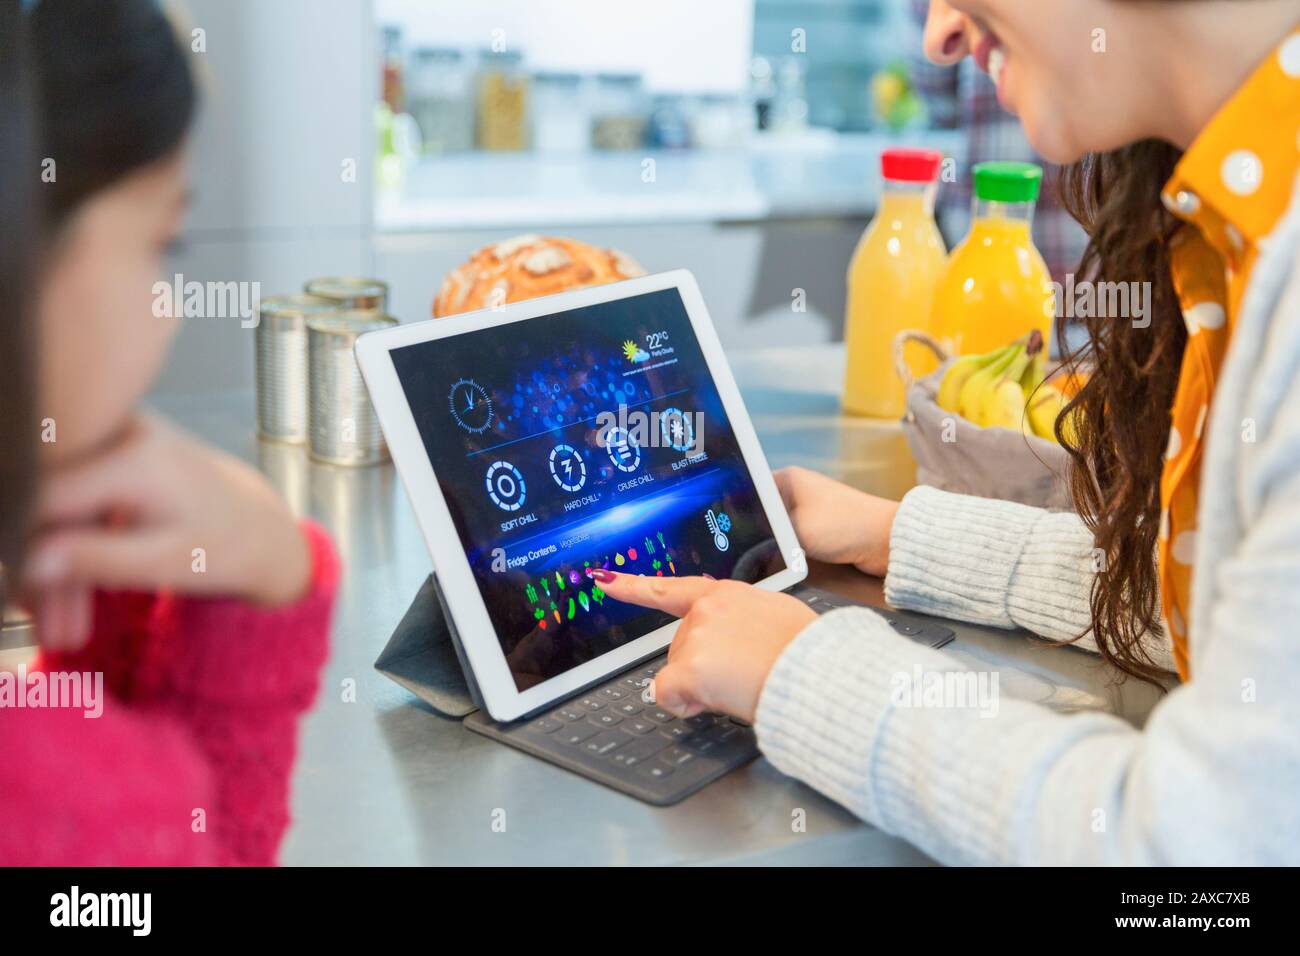 Daughter watching mother preparing grocery list on digital tablet in kitchen Stock Photo